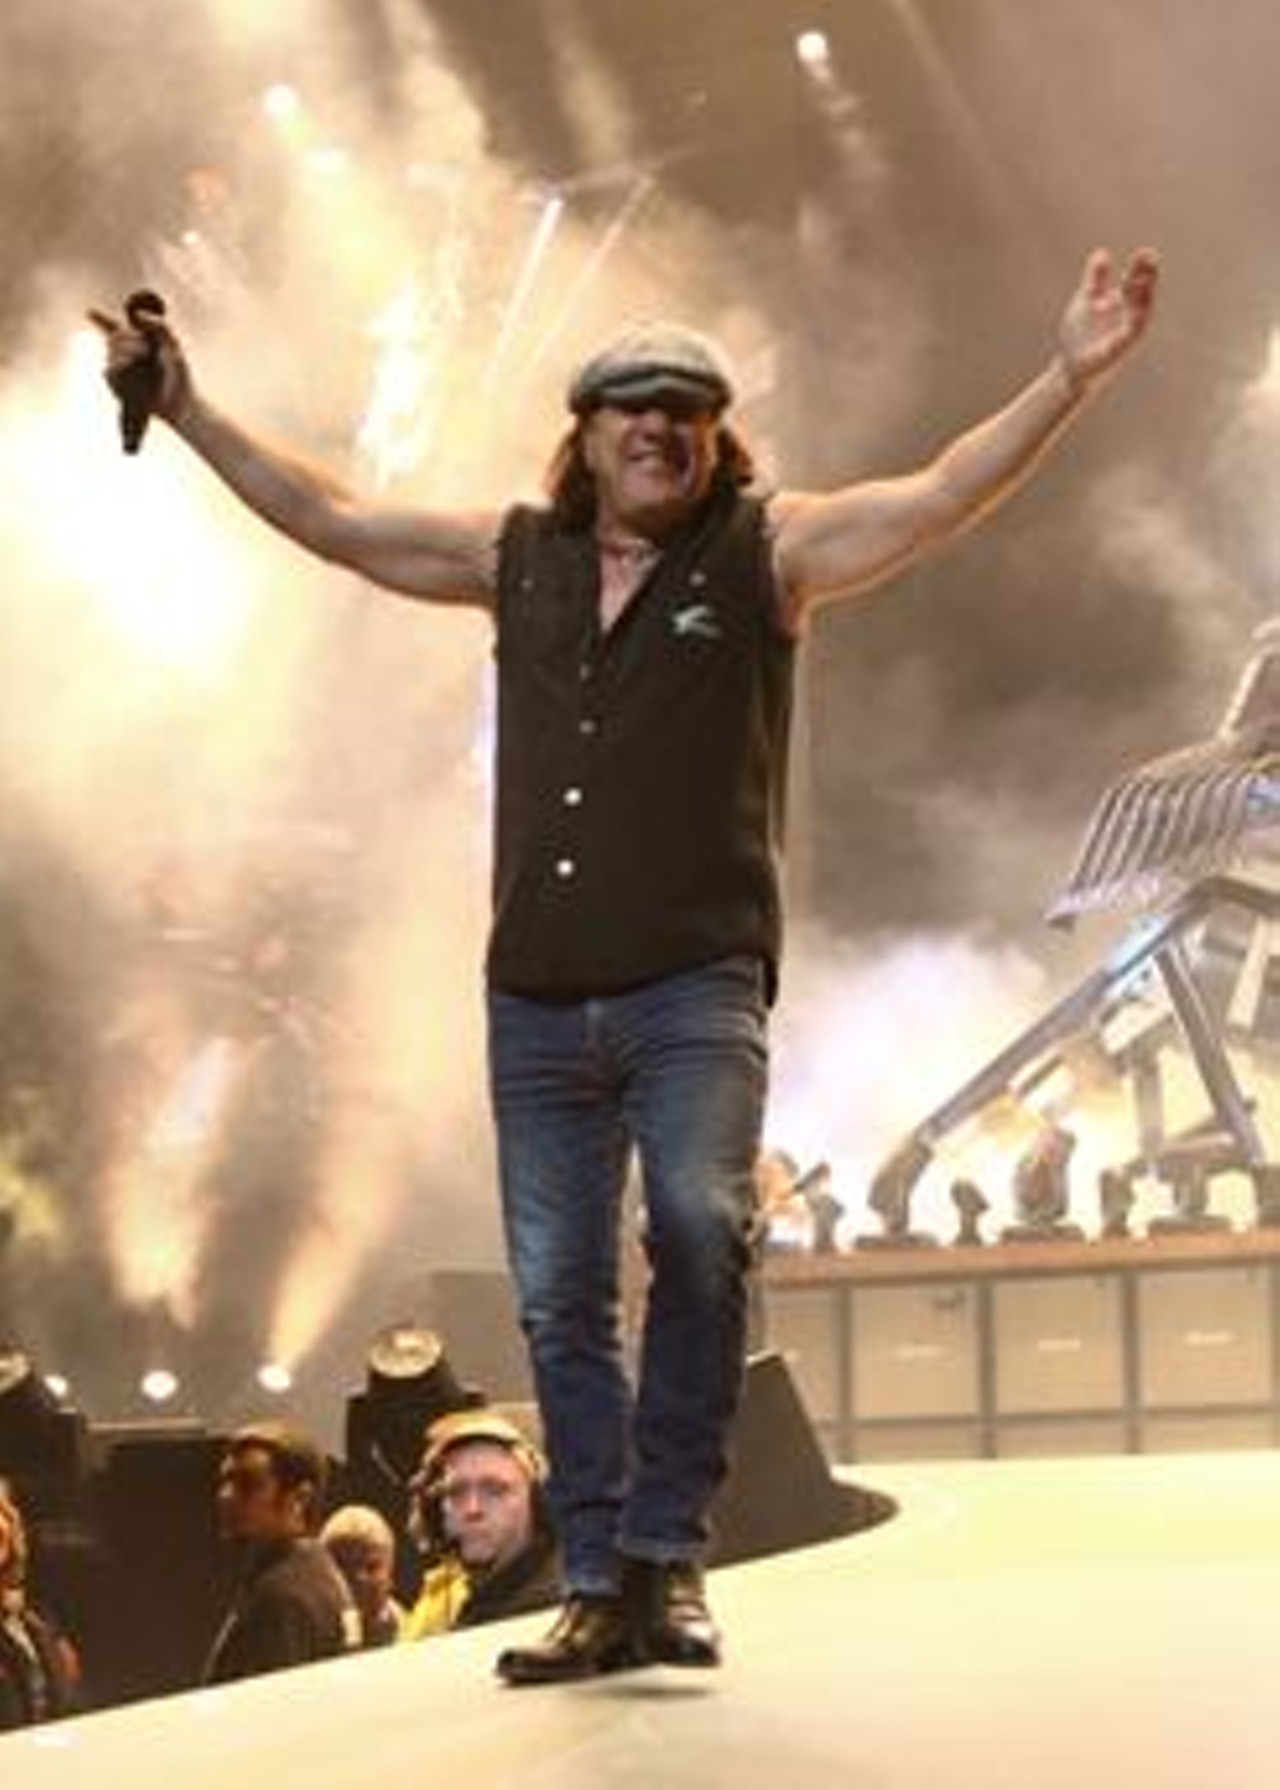 Read the AC/DC concert review in A to Z, the RFT's music blog.